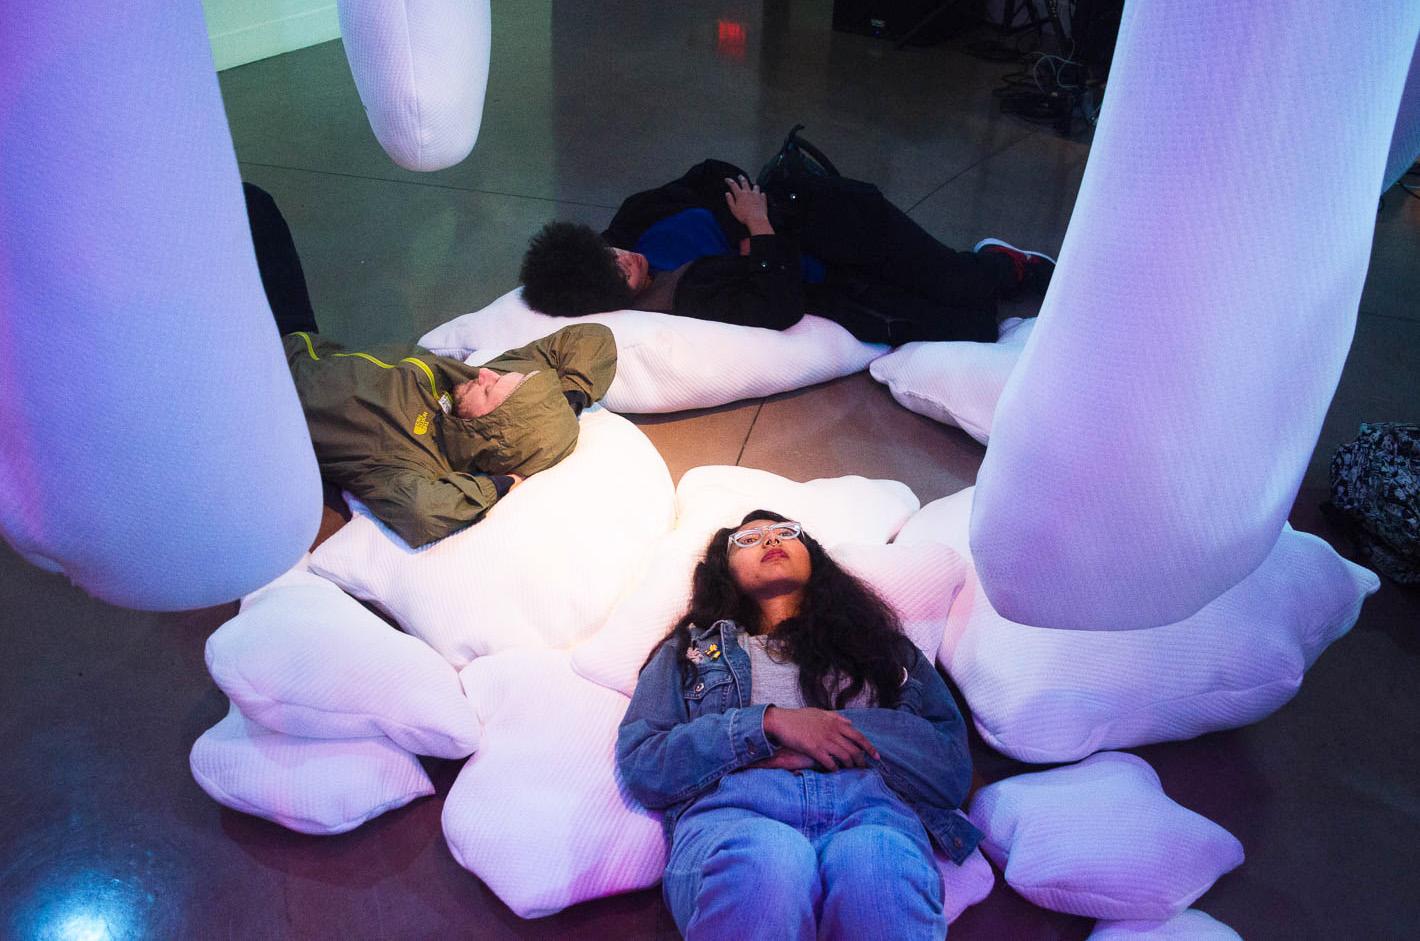 Students lay on pillows part of an installation called “Serotonin” at the opening reception for Macro Waves’ NVM Gallery at SF State on Monday, October 19, 2017. (Richard Lomibao/Golden Gate Xpress)